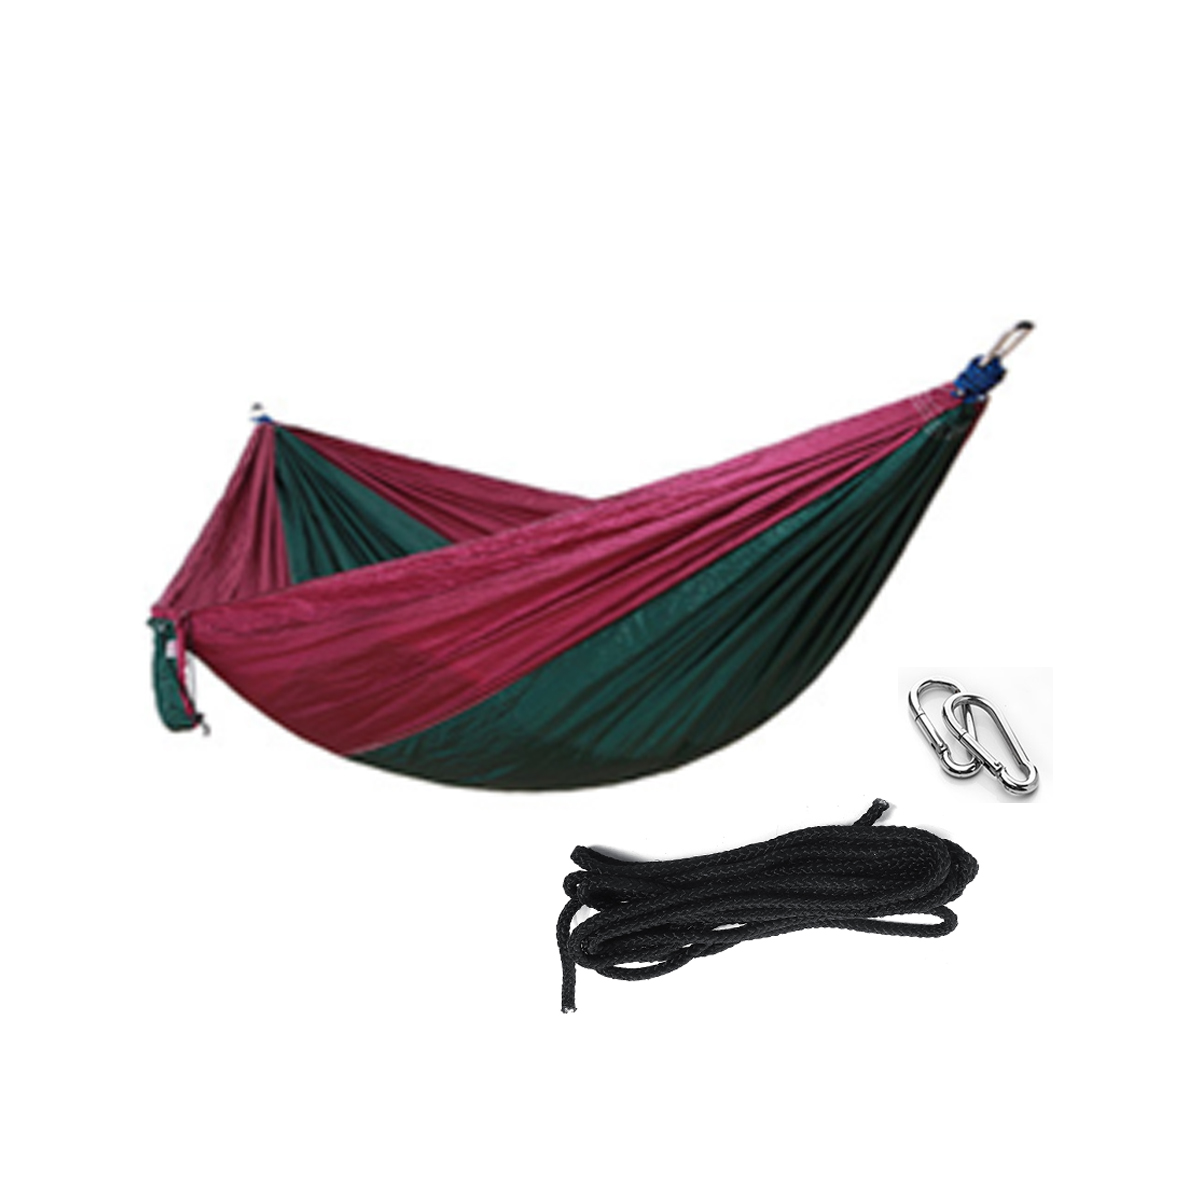 Outdoor-Travel-Double-Person-Hanging-Hammock-Max-Load-200KG-Portable-Camping-Hammock-Bed-1514882-7